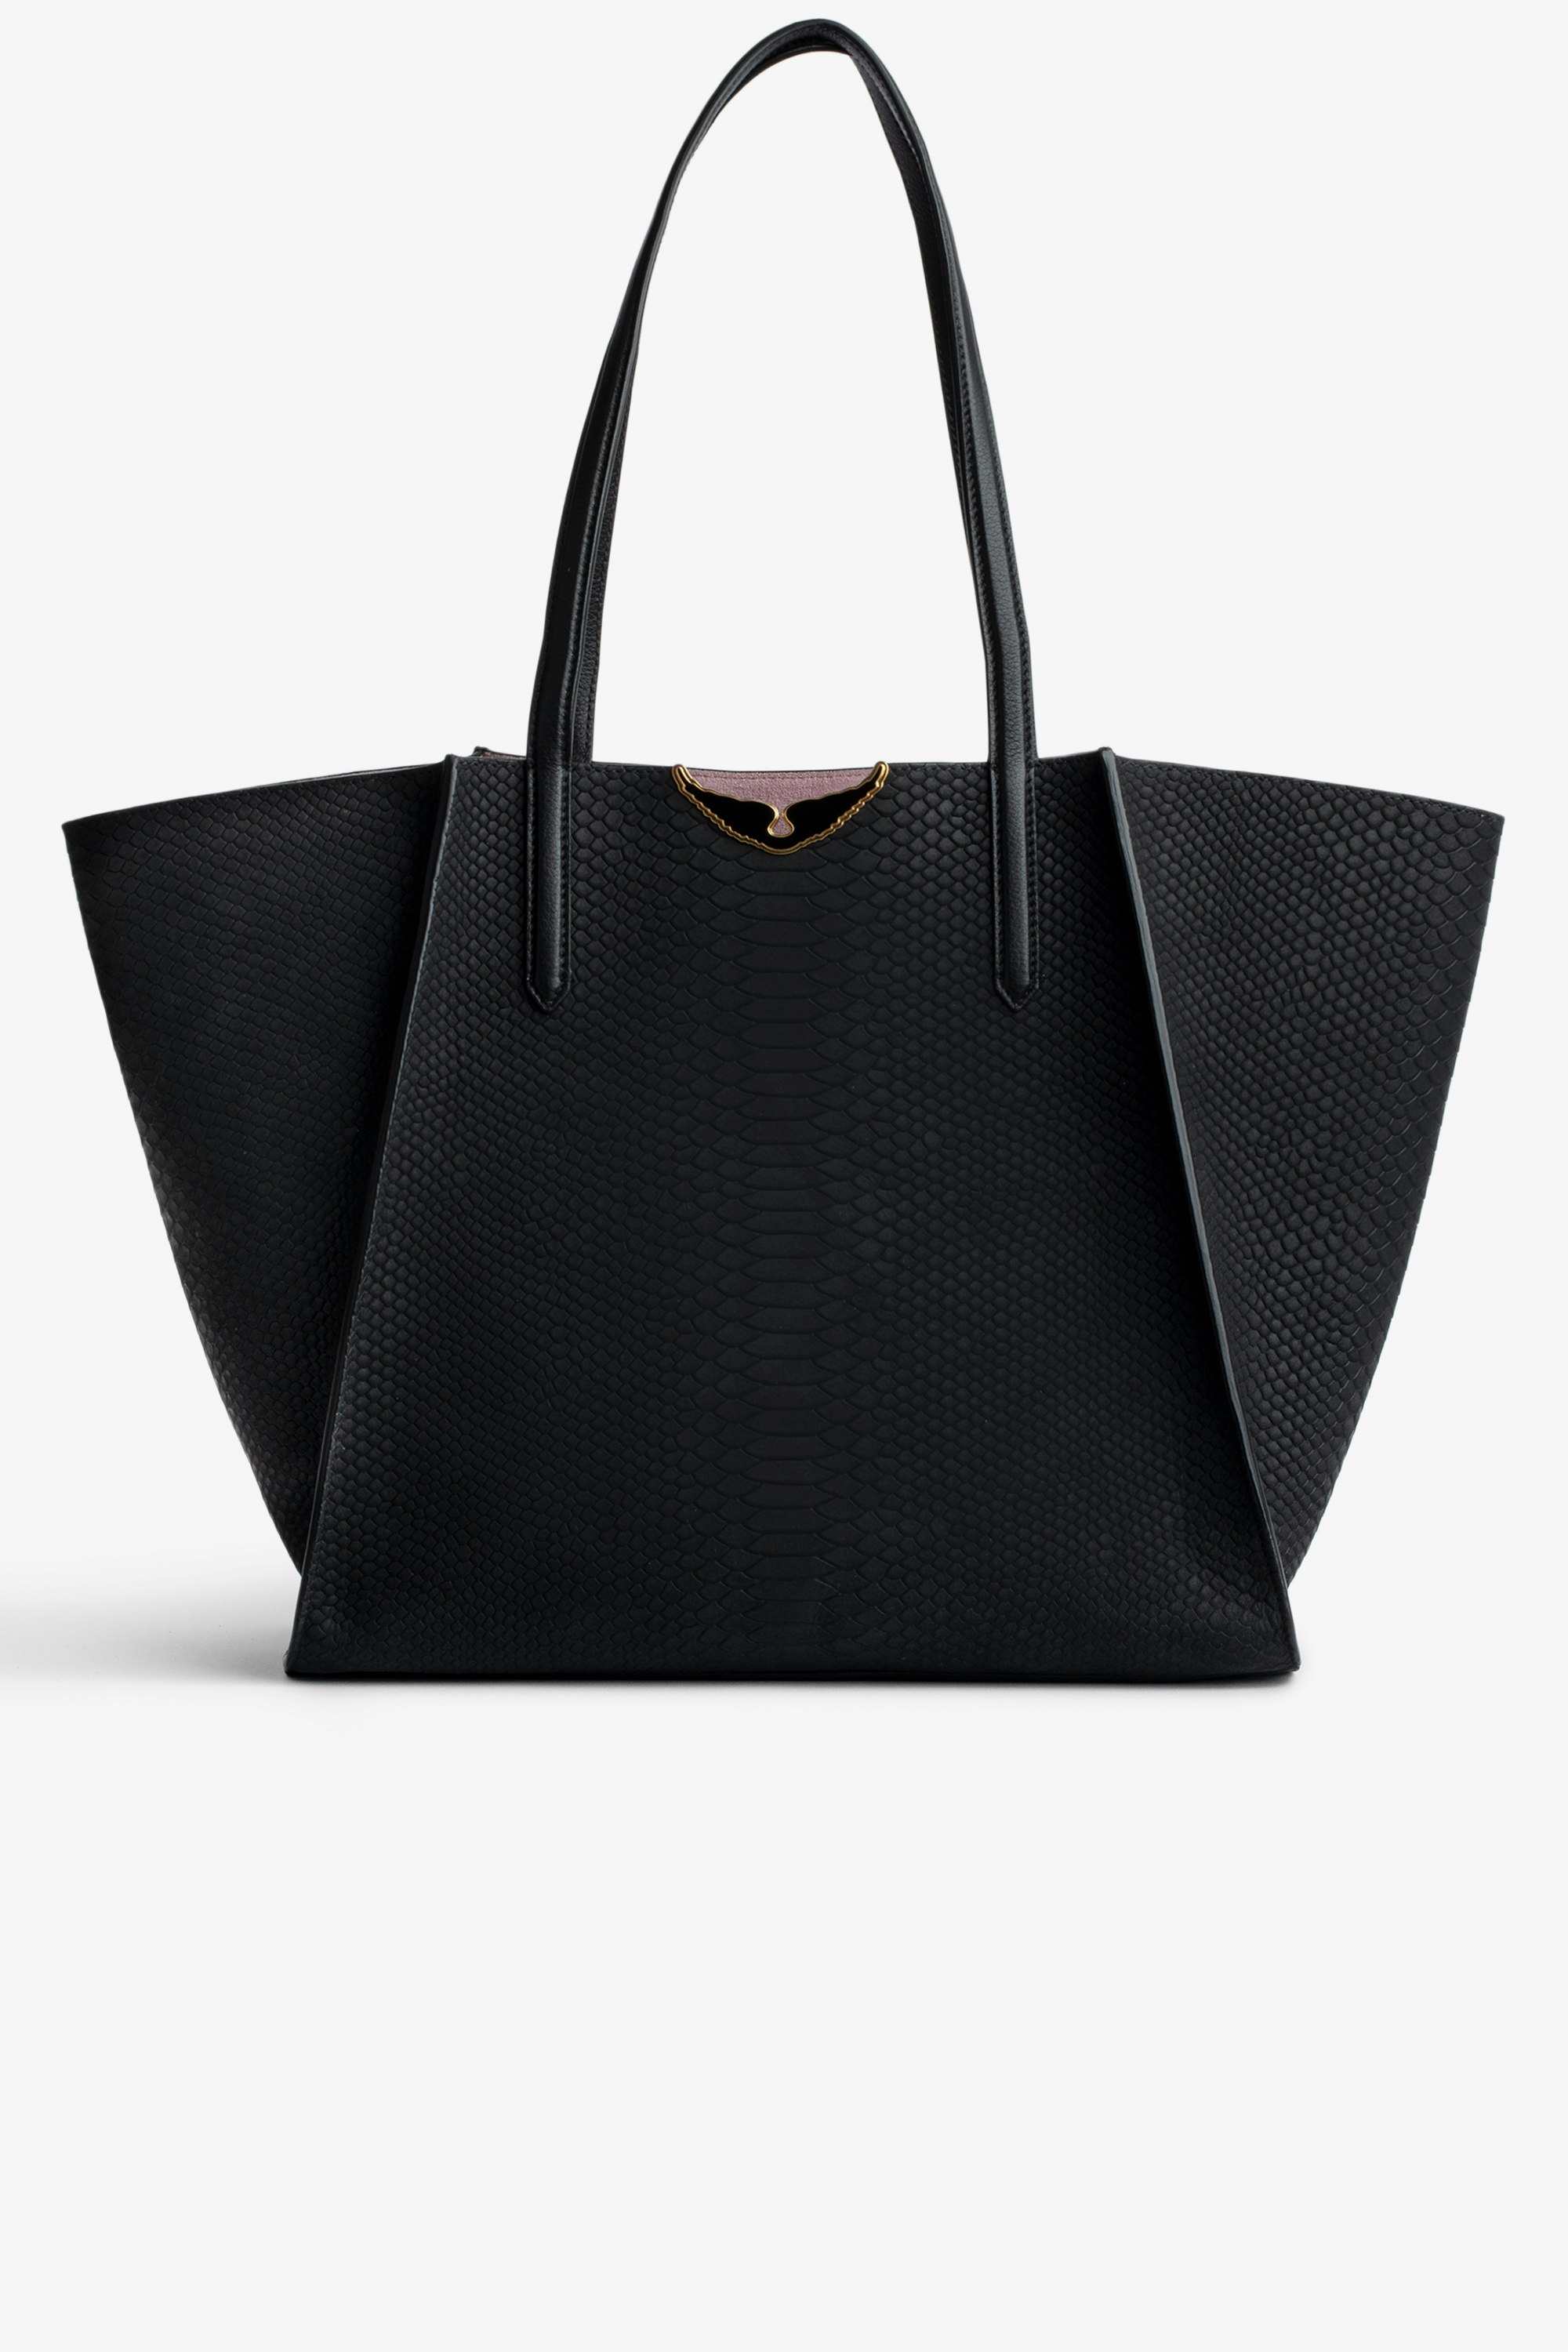 Le Borderline Soft Savage Bag Women's reversible tote bag in black python-effect leather and pink suede with black lacquered wings.